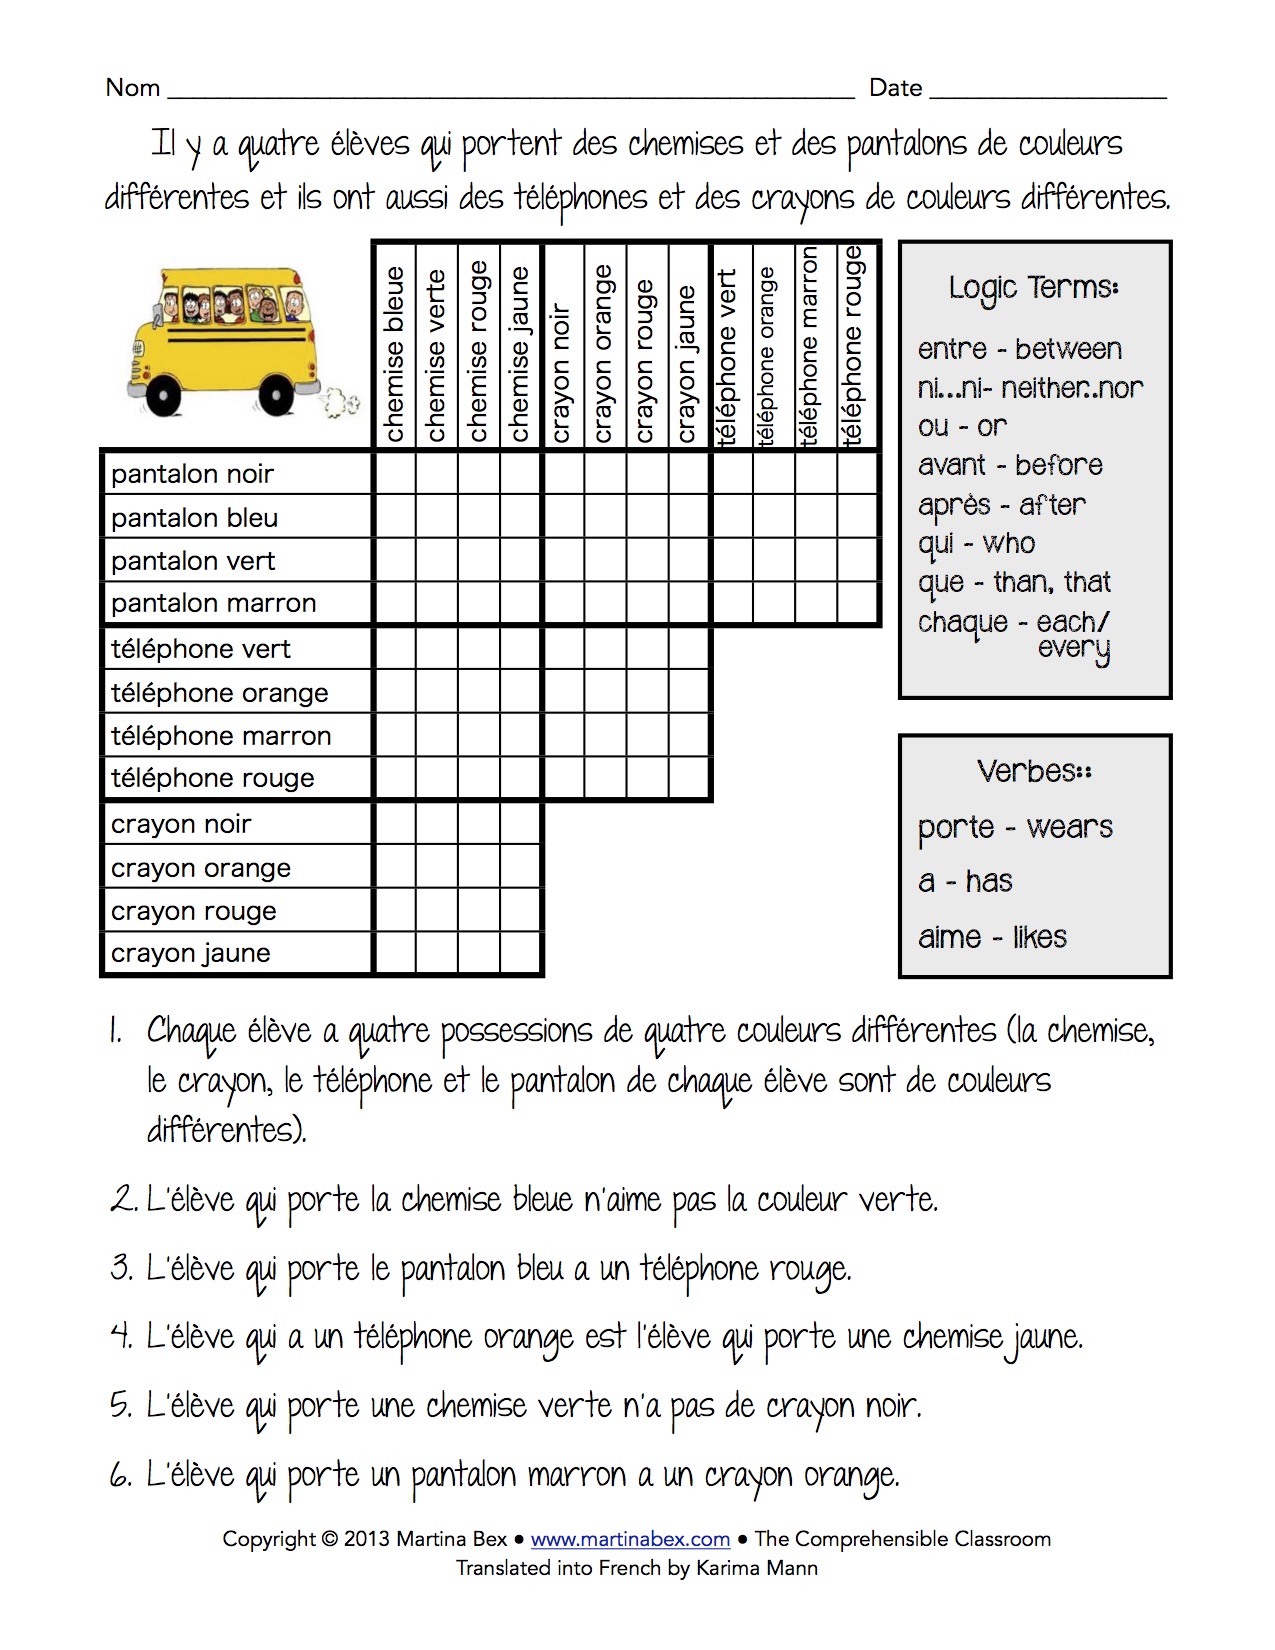 solve logic table puzzles